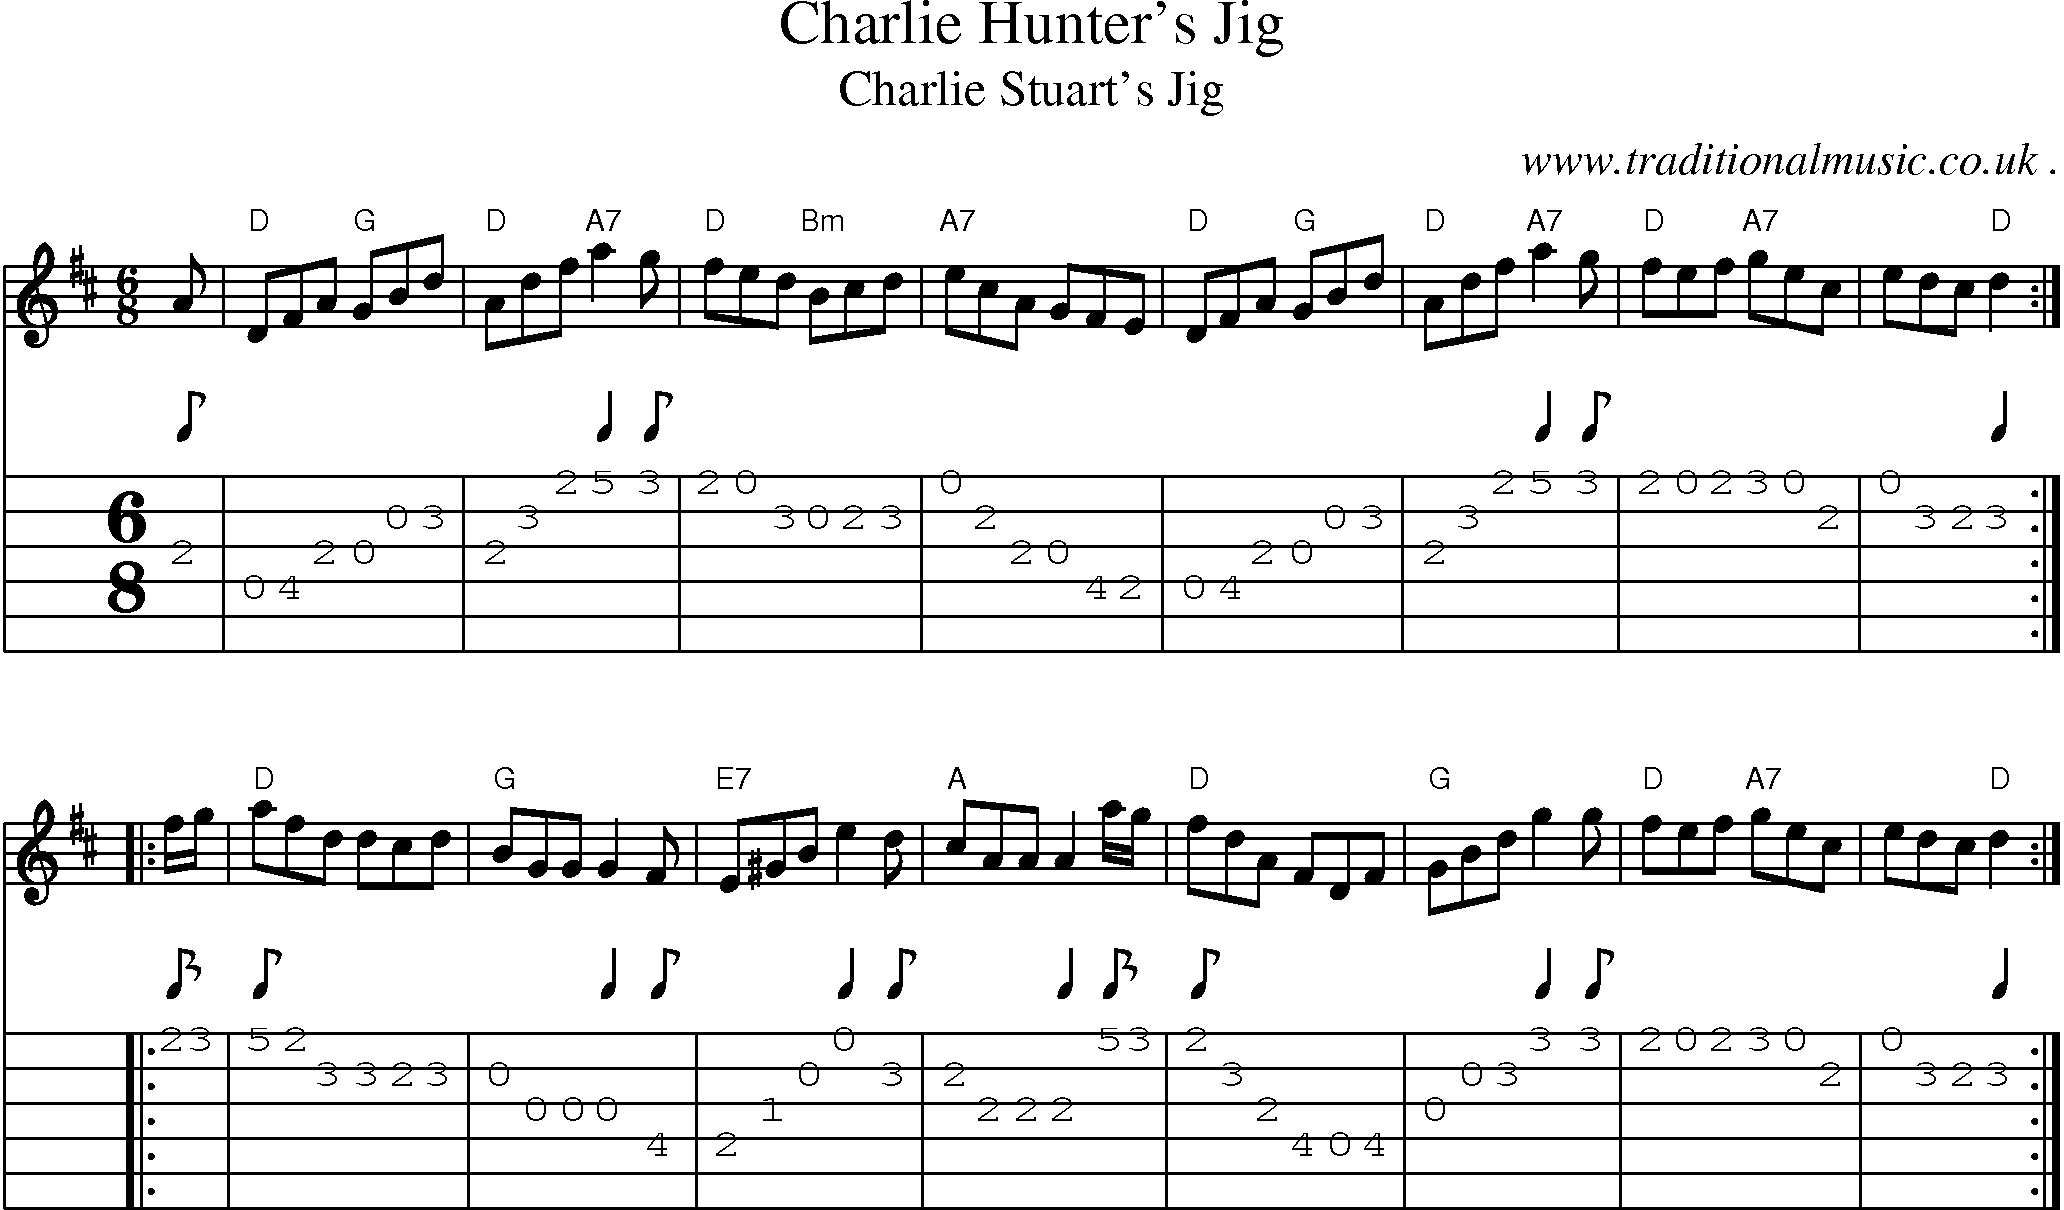 Sheet-music  score, Chords and Guitar Tabs for Charlie Hunters Jig